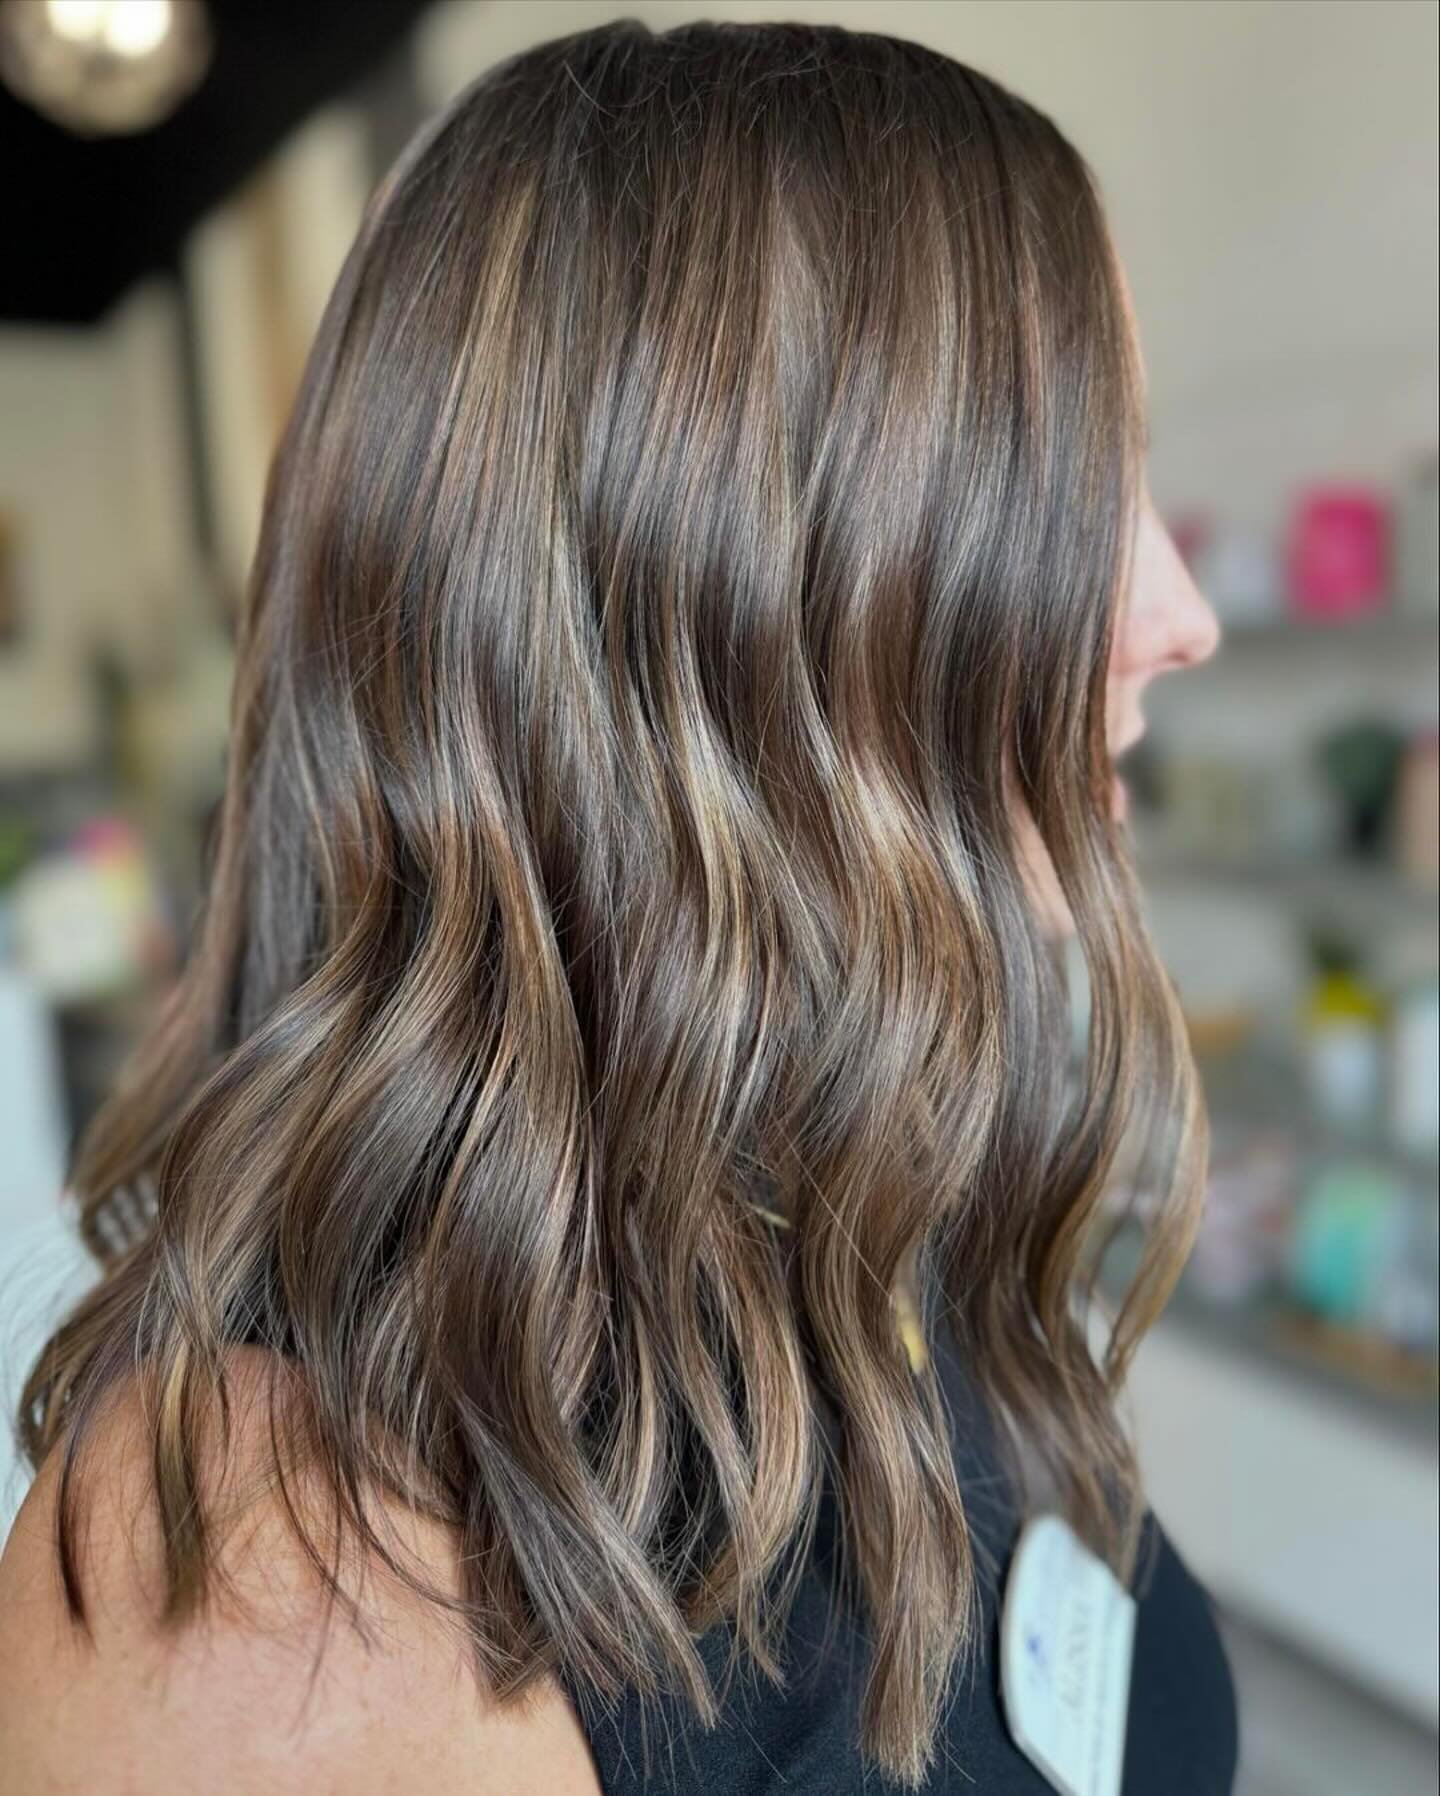 Kissed by the sun 🌞 

Transform your look with a touch of luxury. Call or book today and reach your hair goals with Isabella at our Fort Worth location! 

#HairGoals #HairInspo #HairStyle #HairFashion #HairLove  #HairStylist #HairOfTheDay  #HairEnvy